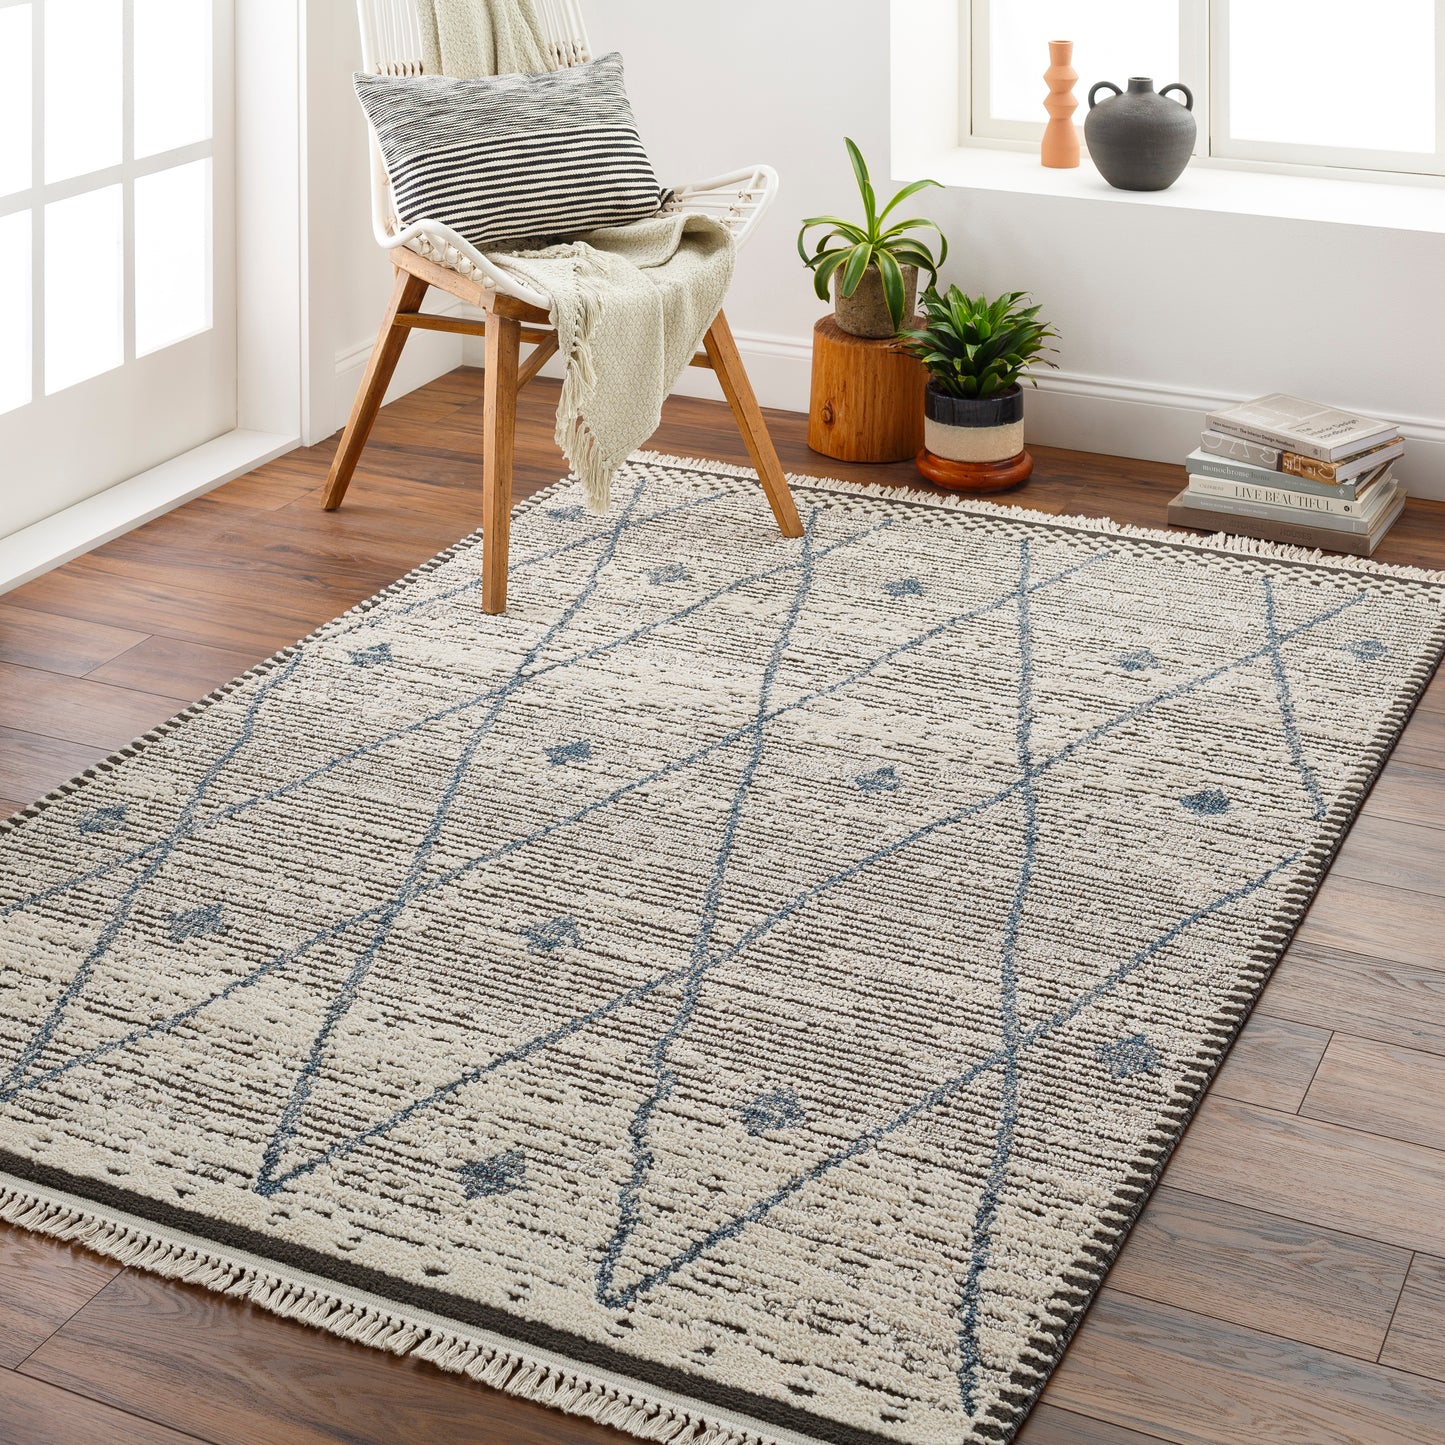 Berlin 31735 Machine Woven Synthetic Blend Indoor Area Rug by Surya Rugs